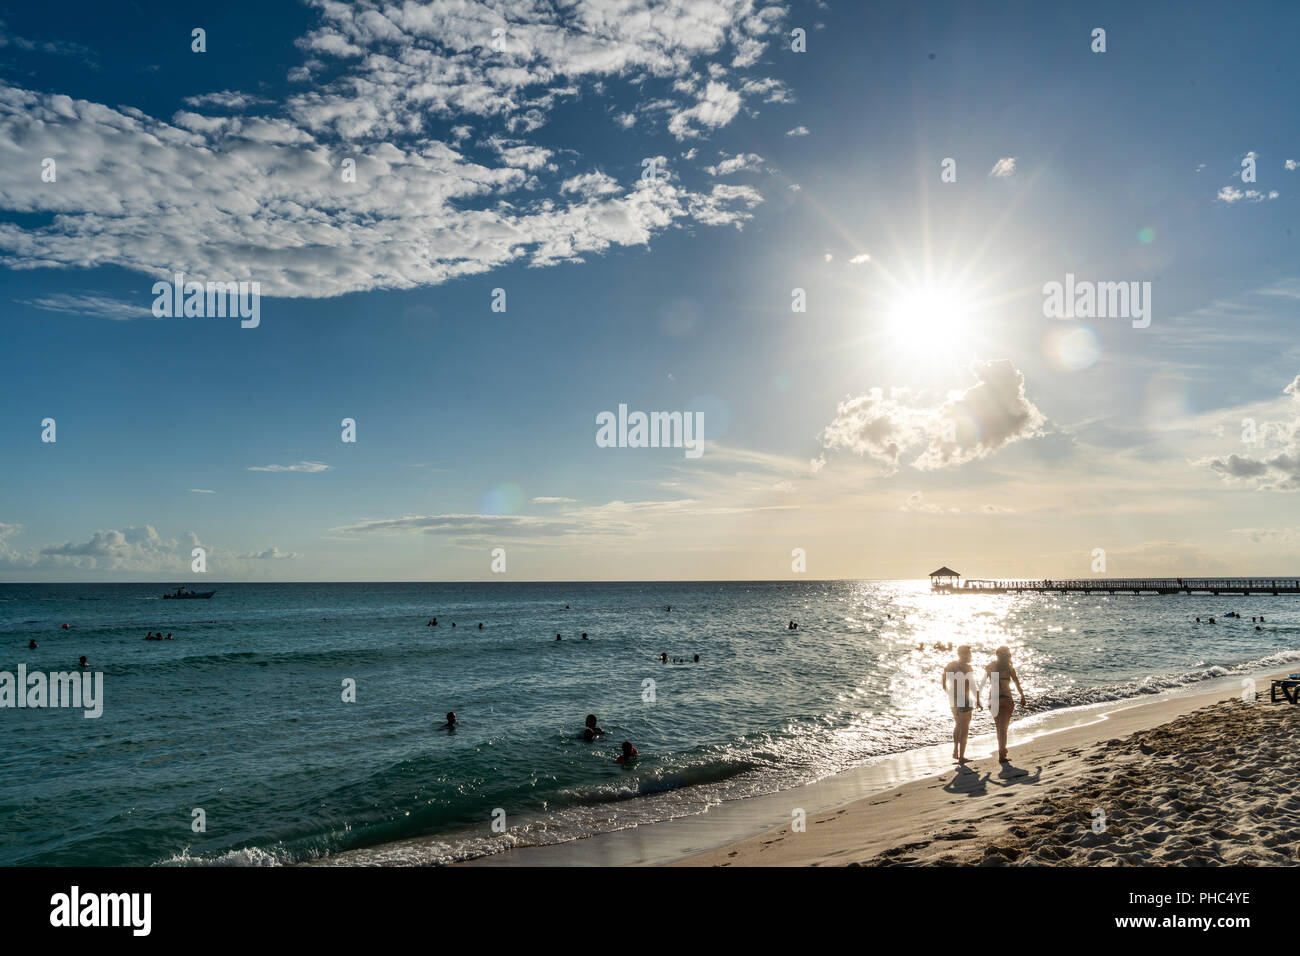 Bayahibe, Dominican Republic, 26 August 2018. Tourists vacationing at Caribbean resort in Dominican Republic. Photo by Enrique Shore Stock Photo